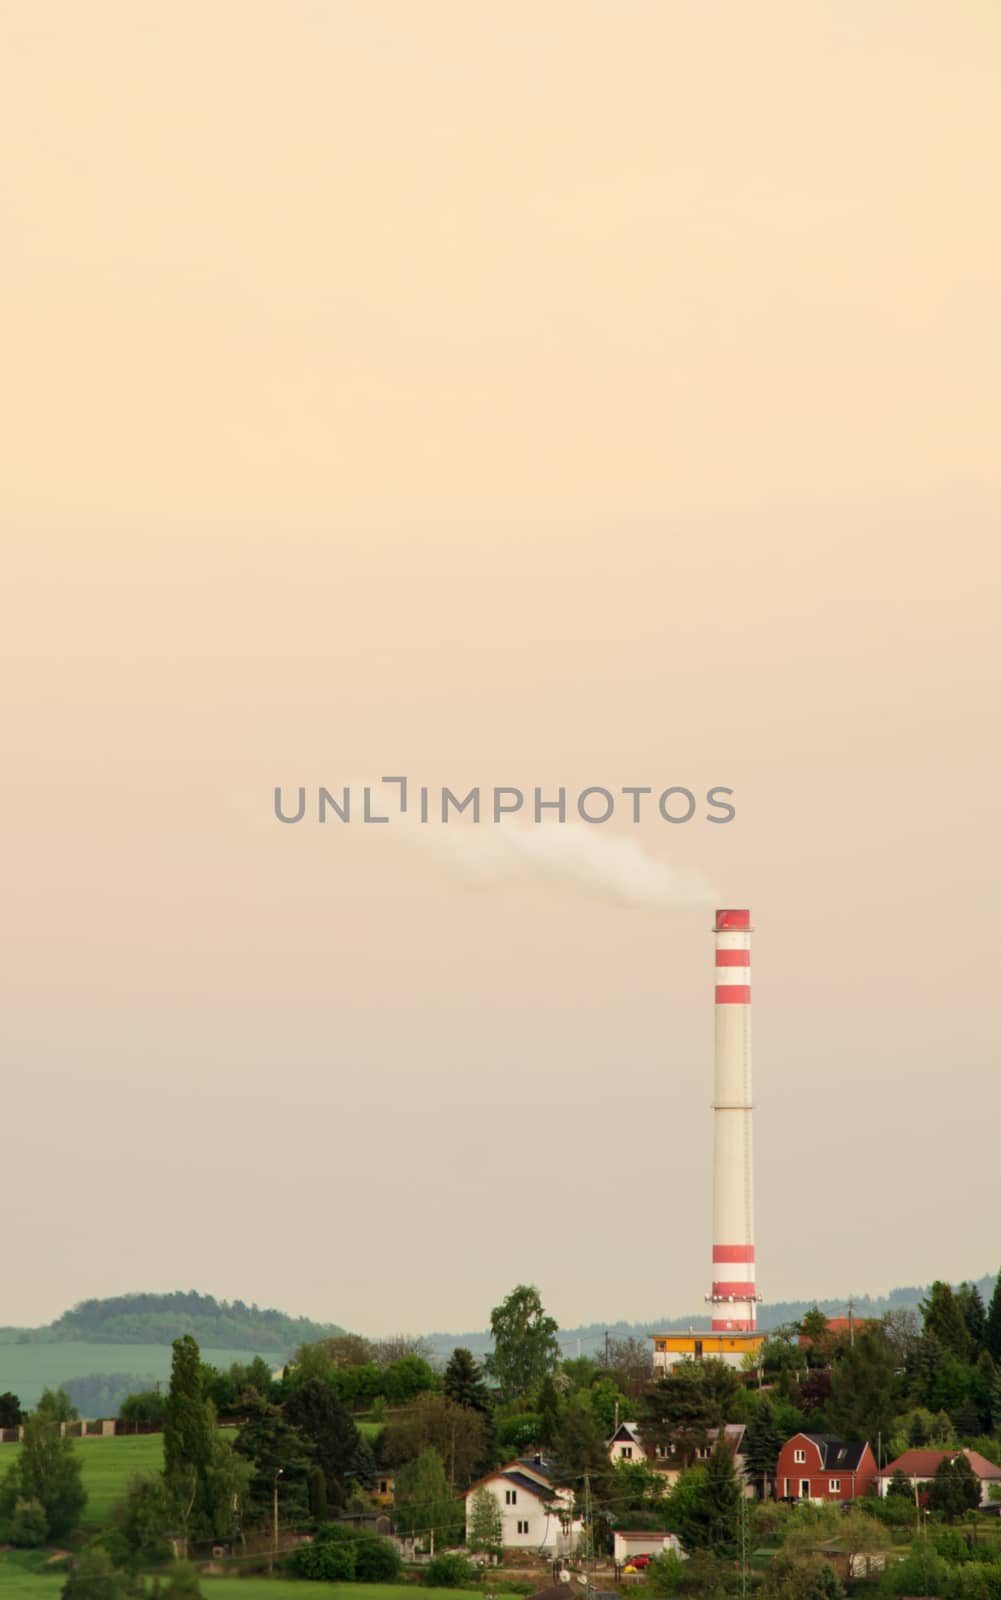 Town landscape in sunset with smoke stack.